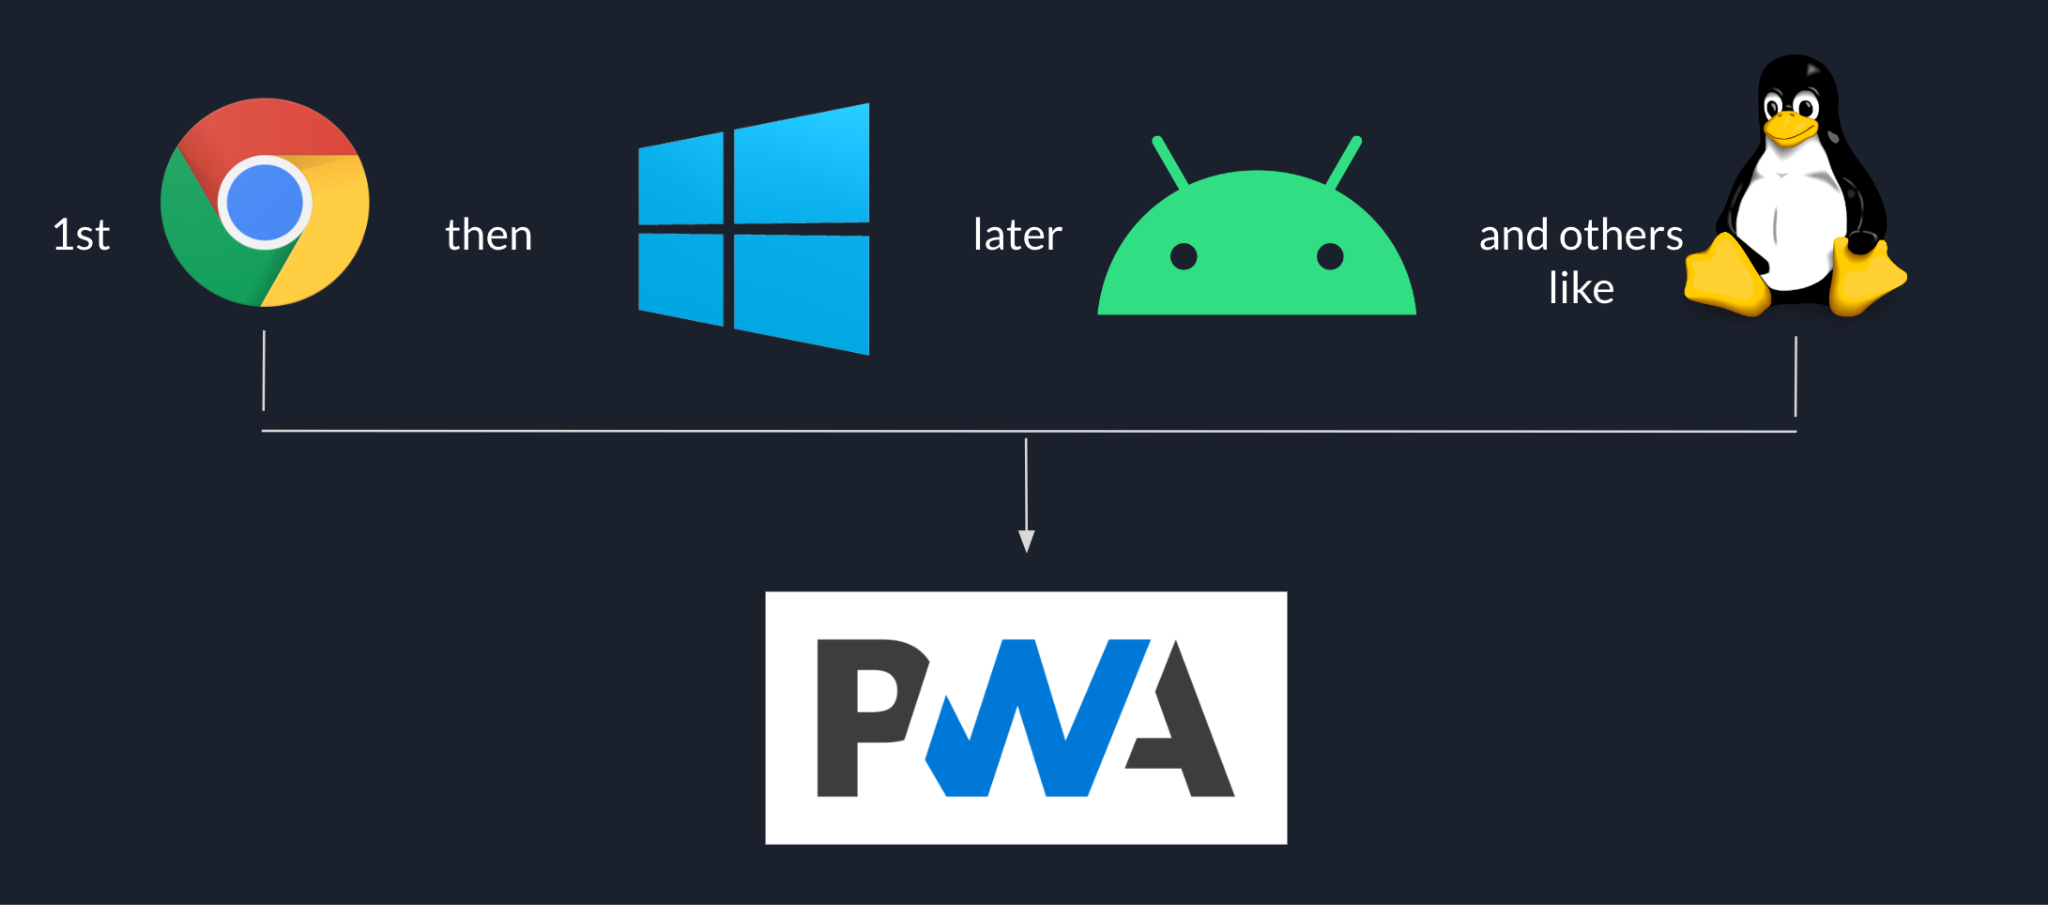 Goodnotes rollout sequence starting with Chrome, then Windows, followed by Android, and other platforms like Linux at the end, all based on the PWA.